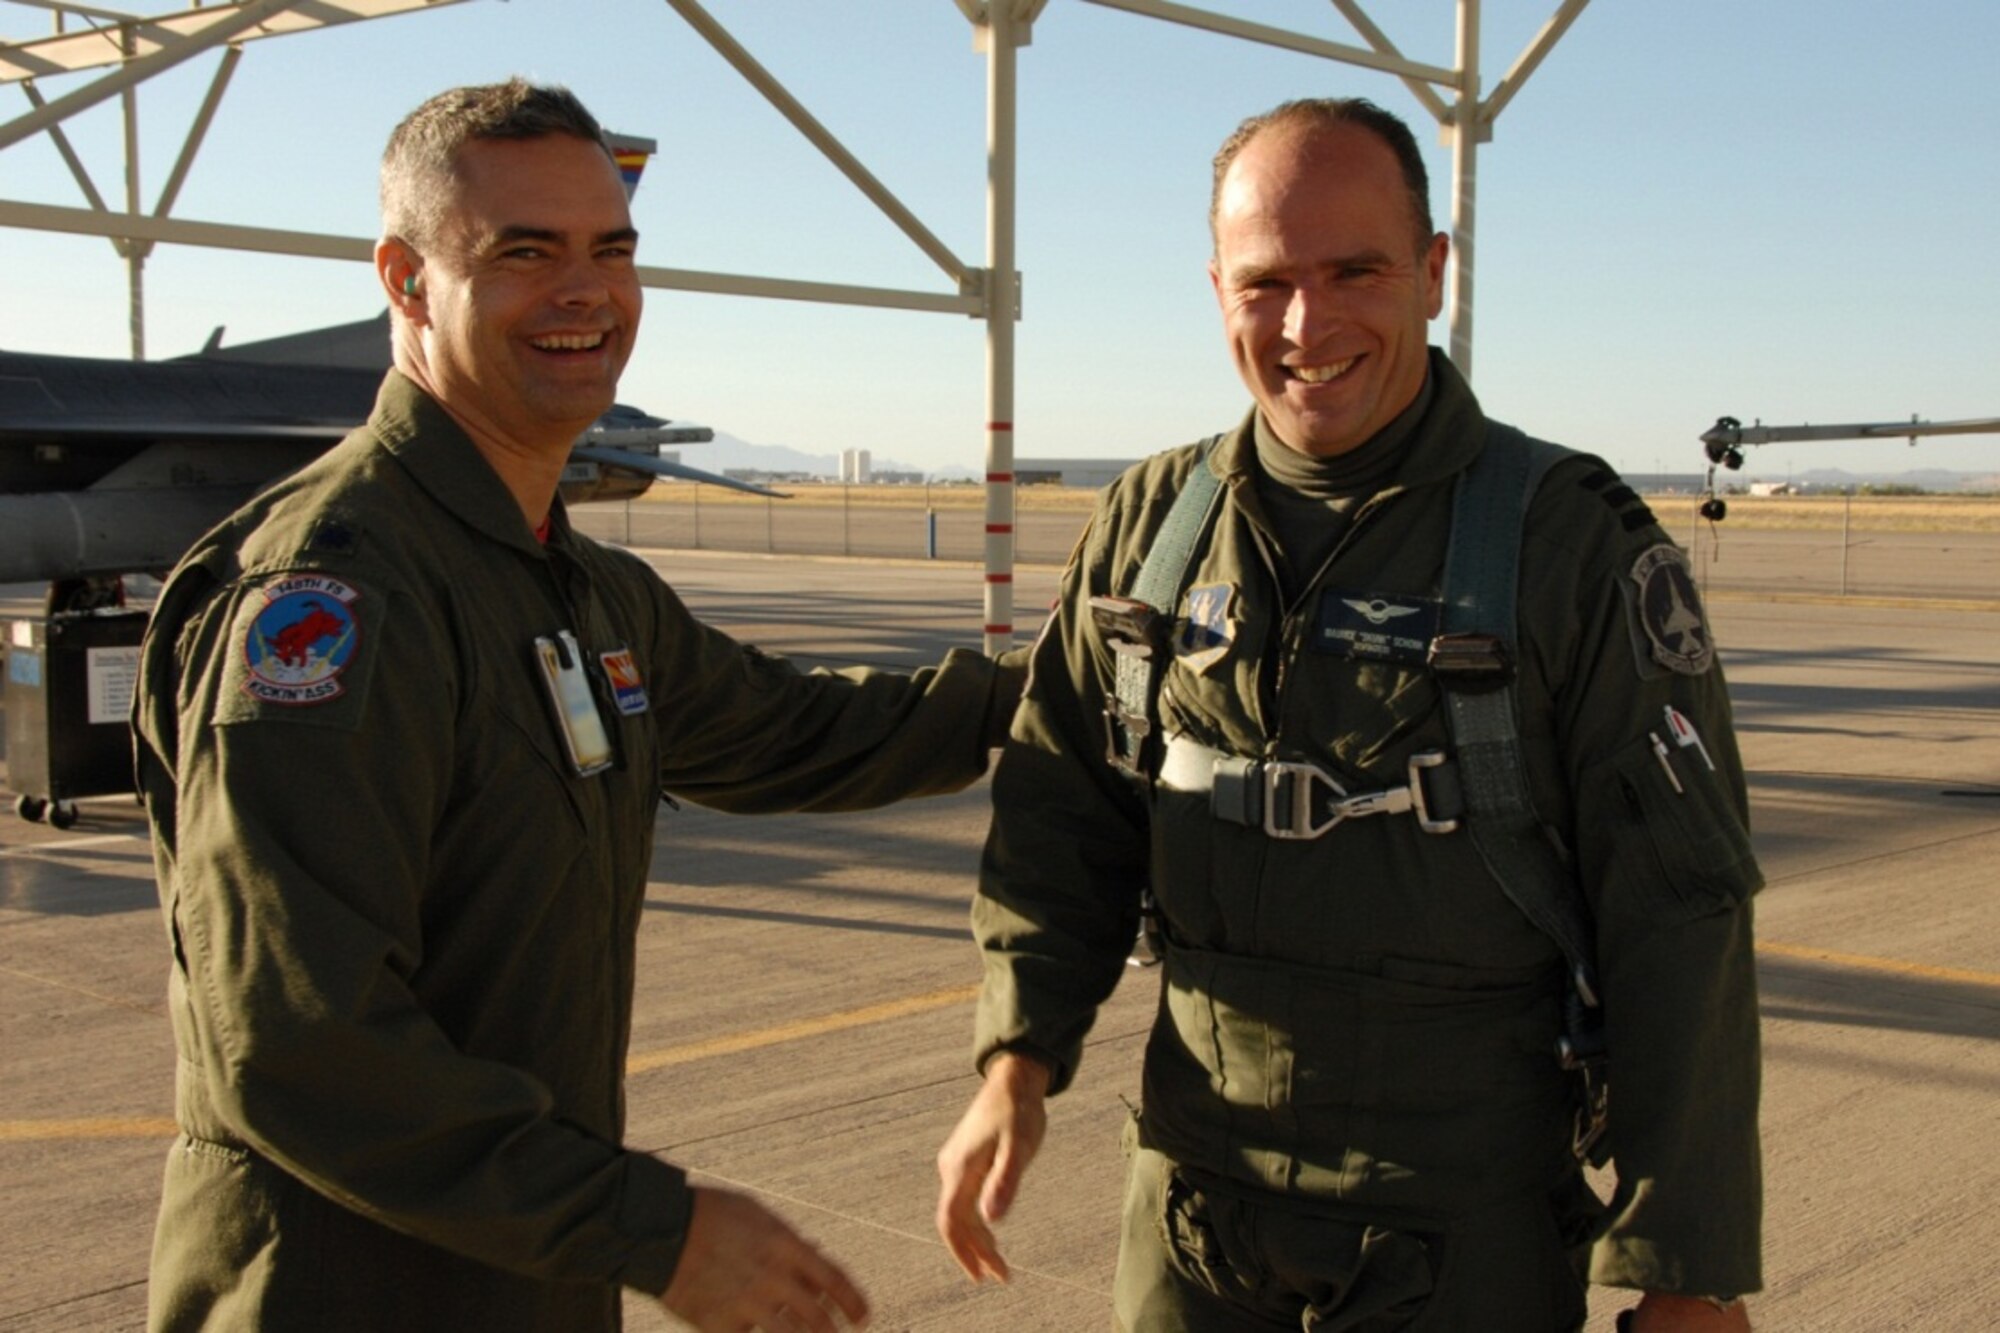 Royal Netherlands Air Force Lt. Col. Maurits Schonk, Commander of the Netherlands Detachment at the 148th Fighter Squadron, is greeted by Maintenance Group Commander Col. Andrew MacDonald at the 162nd Fighter Wing in Tucson, Ariz., October 29, 2010. Lt. Col. Schonk had just delivered the first of ten Dutch F-16 Fighting Falcons to the Wing to be used for pilot training. (U.S. Air Force photo by Master Sgt. David Neve/Released) 